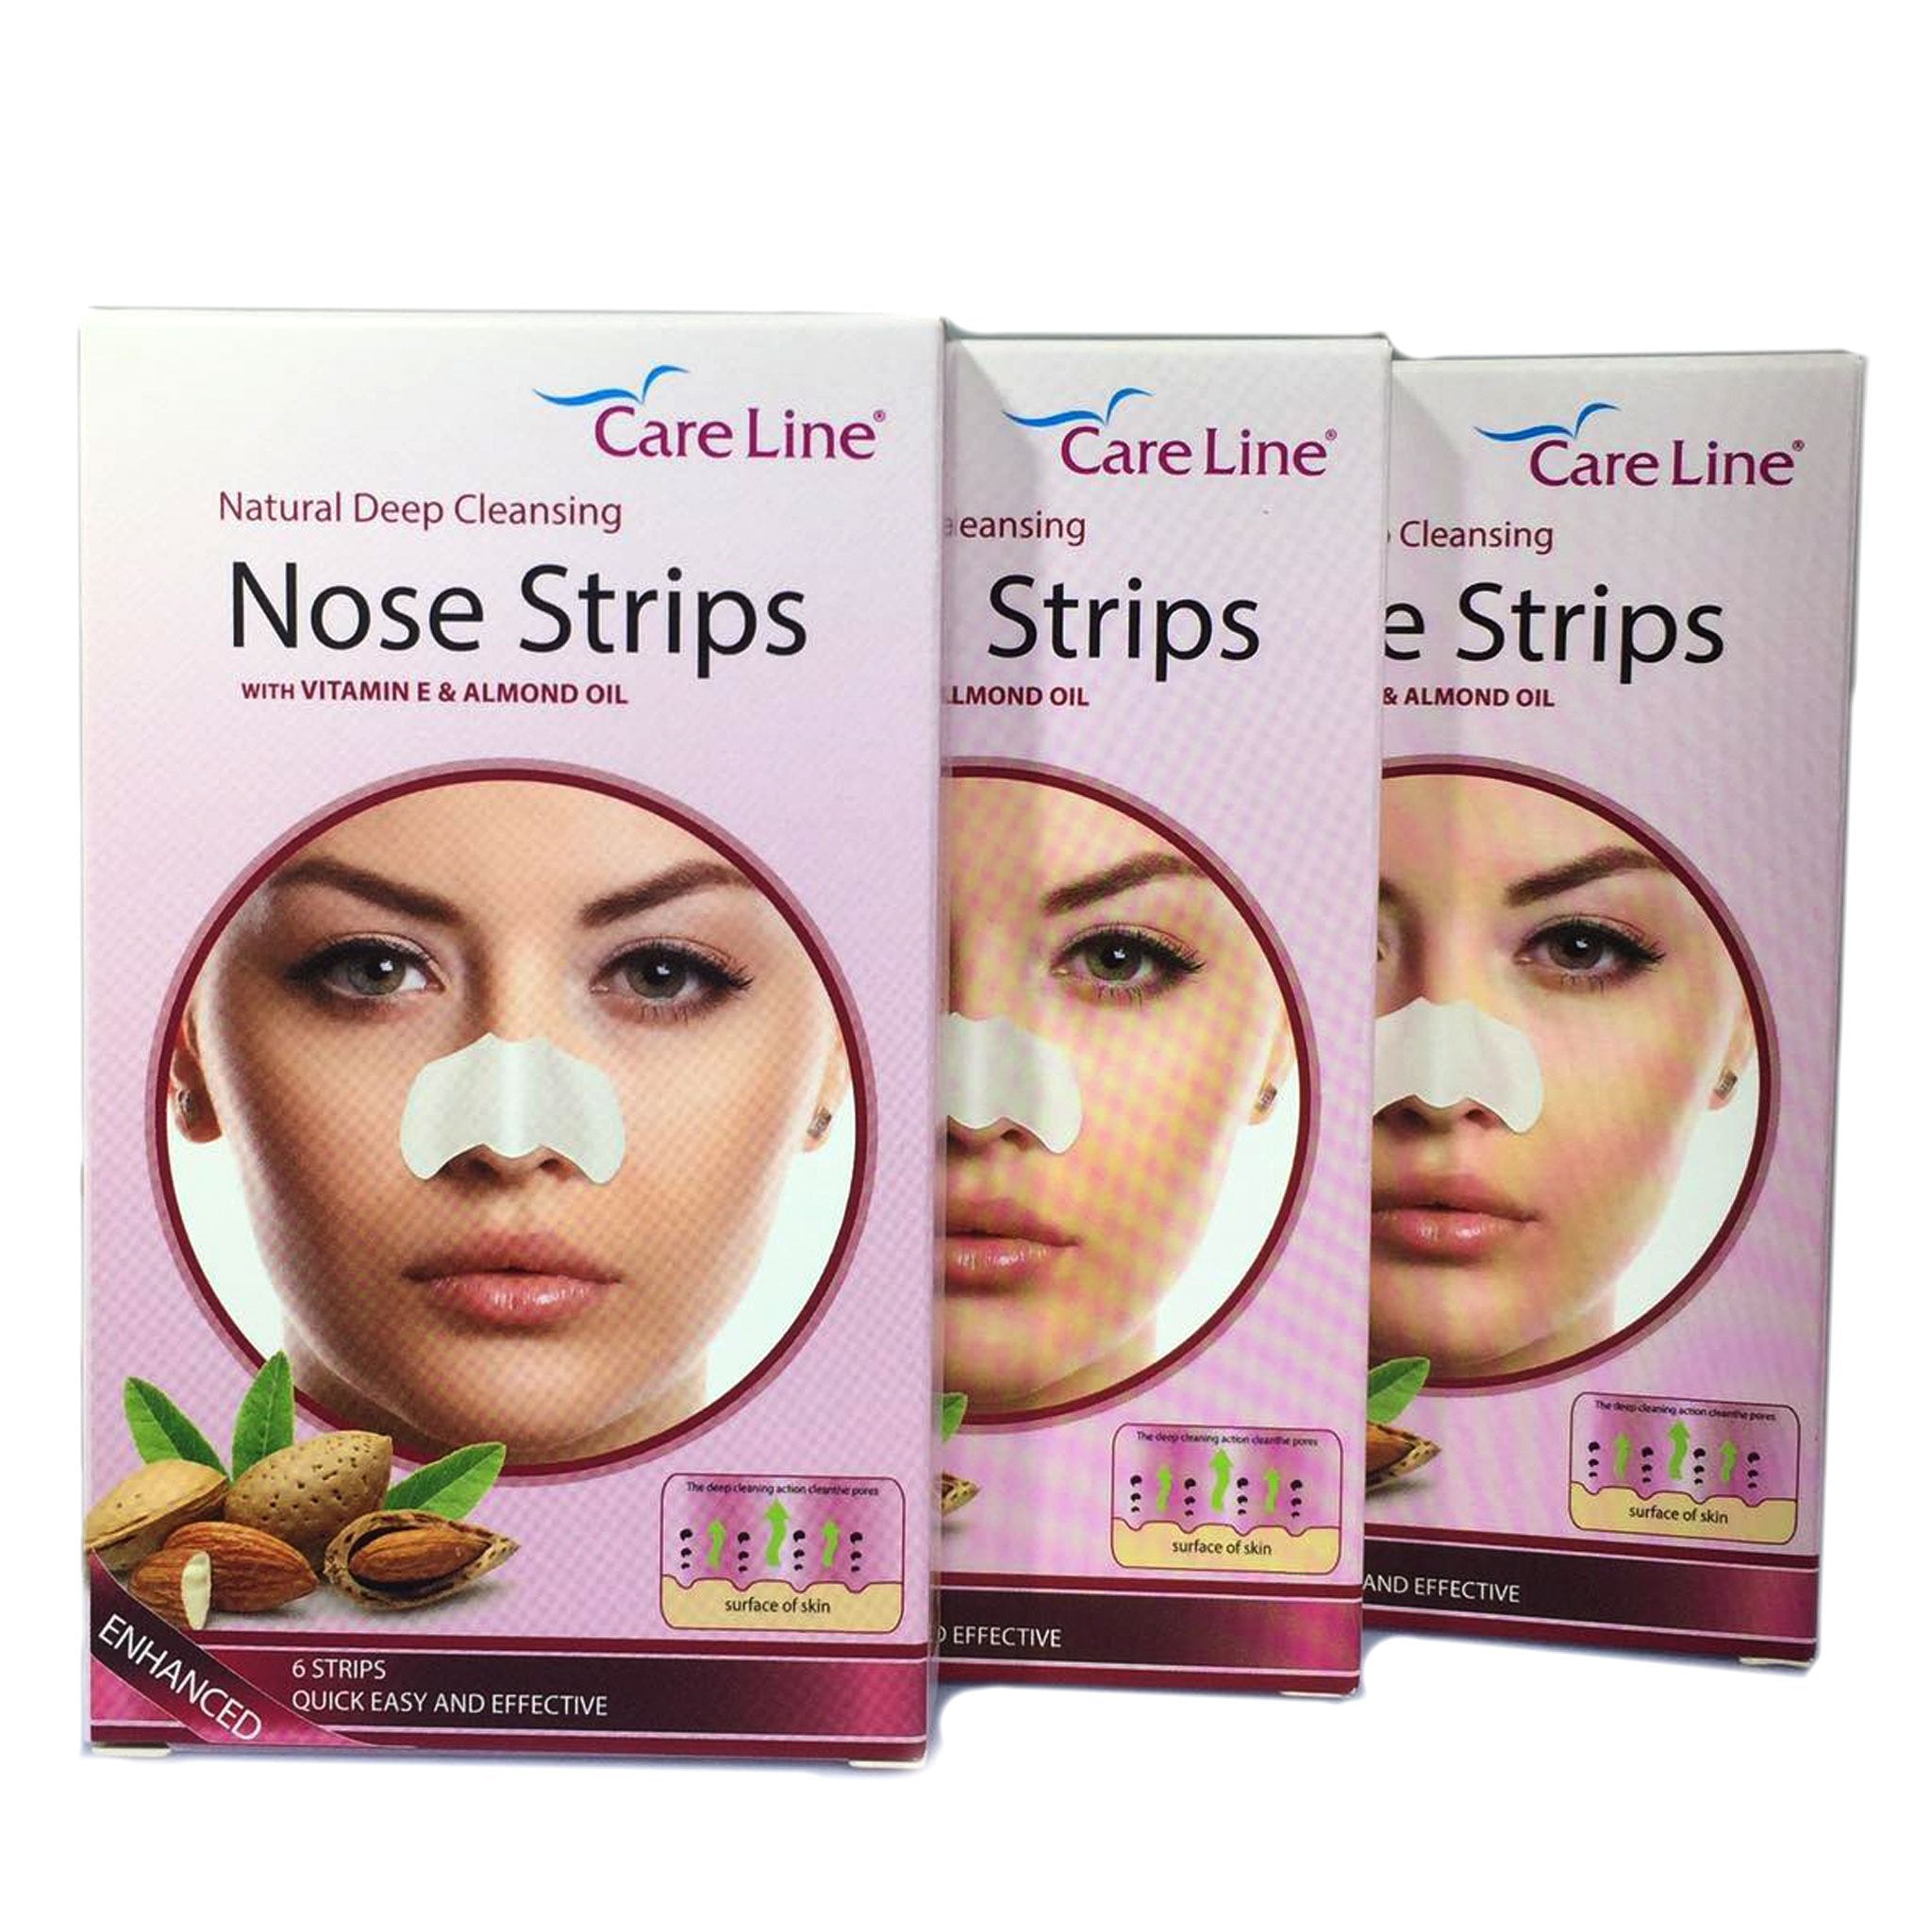 Care Line Nose Strips 6 Strips with Vitamin E and Almond Oil 1Pc Value Pack of 12 